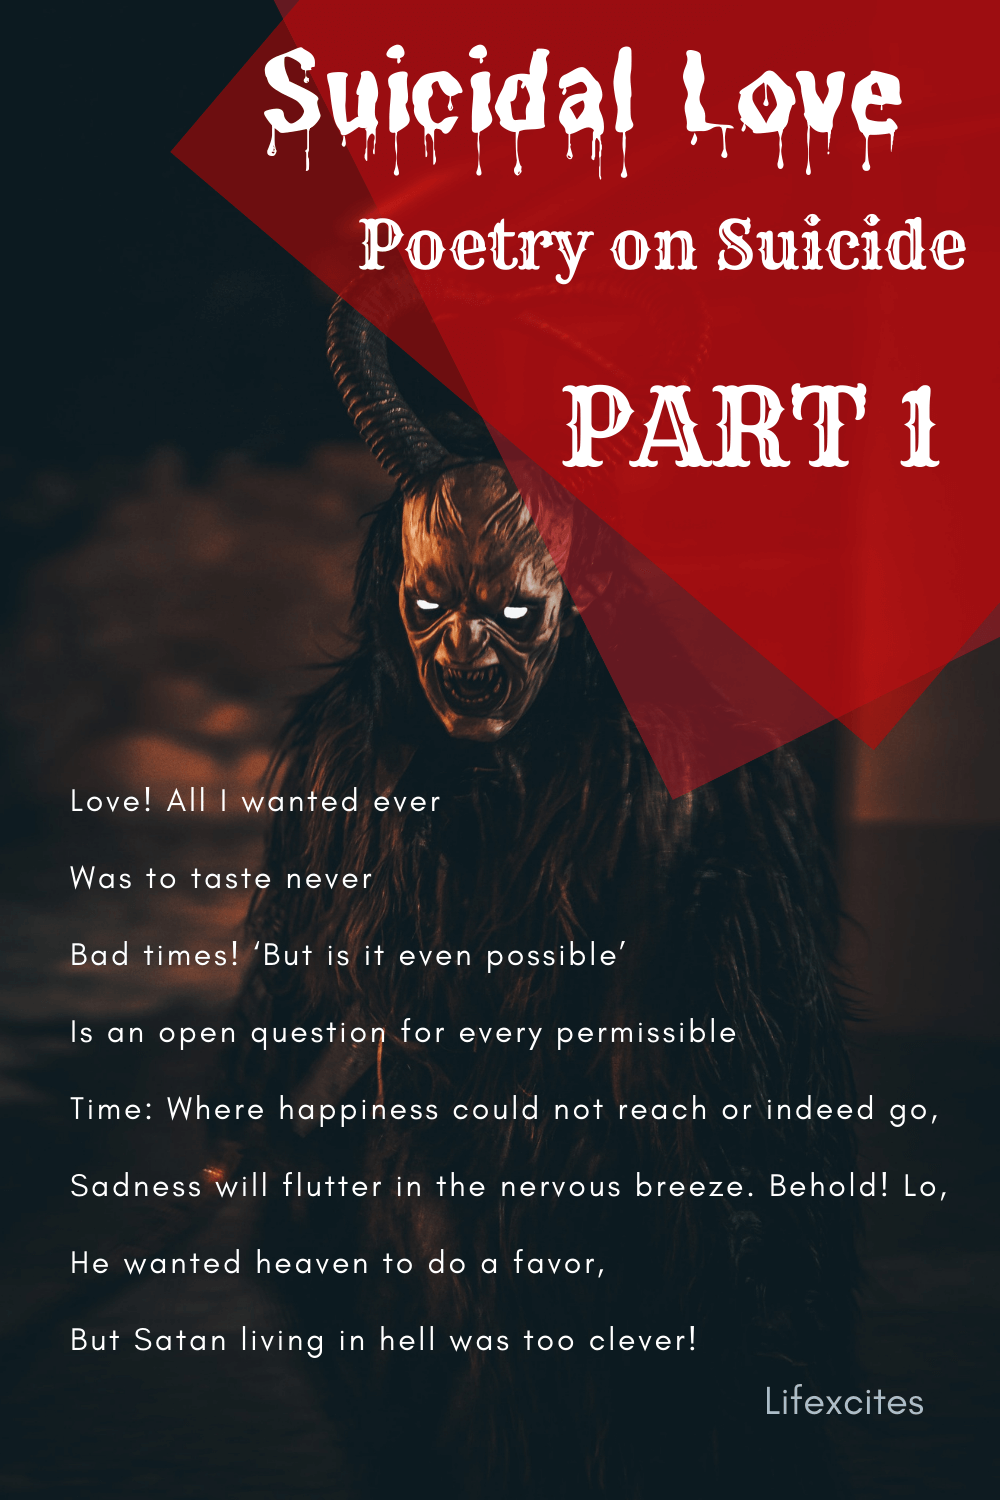 Suicidal Love Poetry on Suicide – Part 1